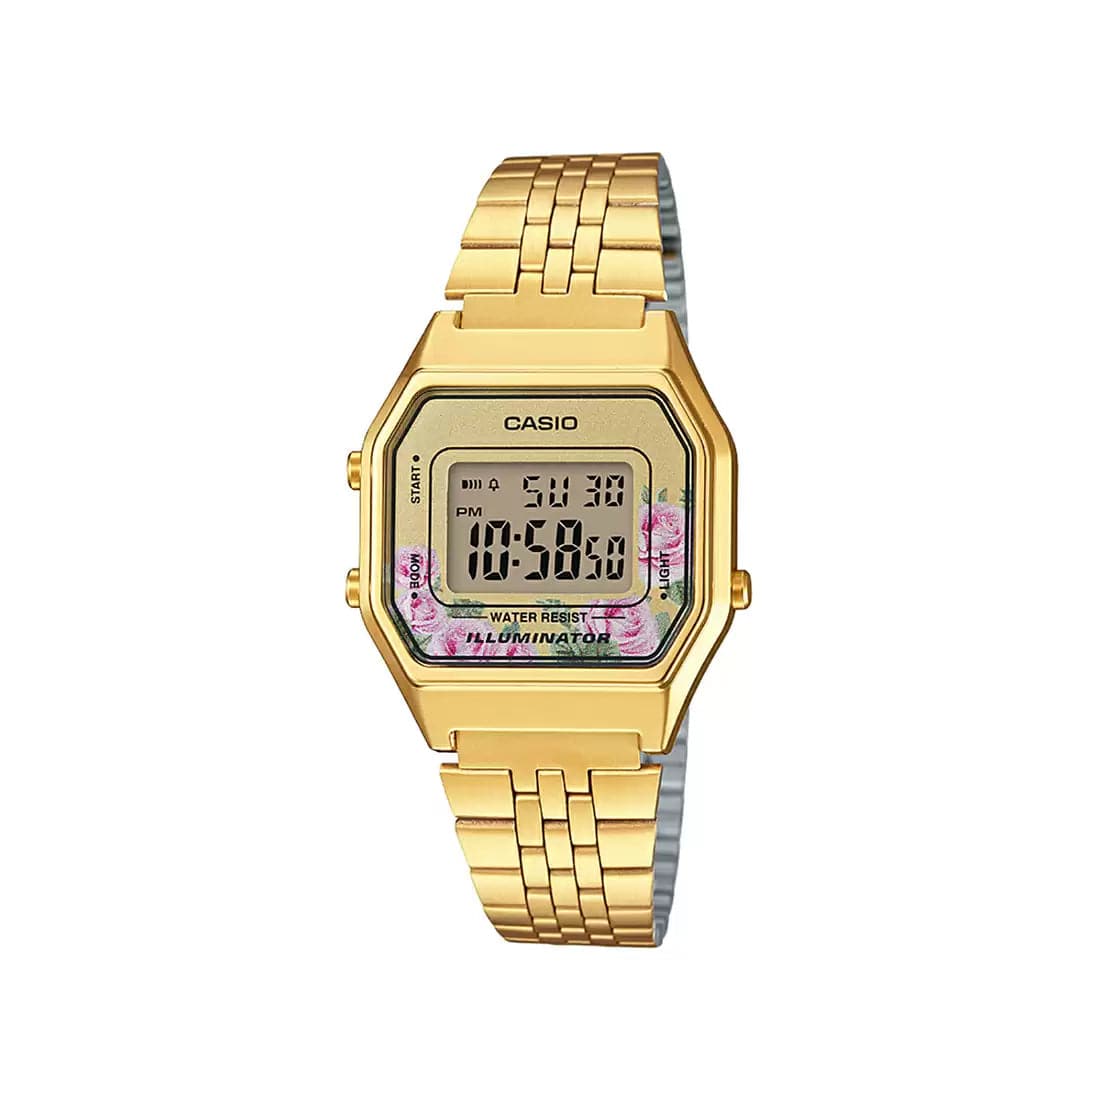 CASIO VINTAGE COLLECTION Gold Digital - Women's Watch D206 - Kamal Watch Company